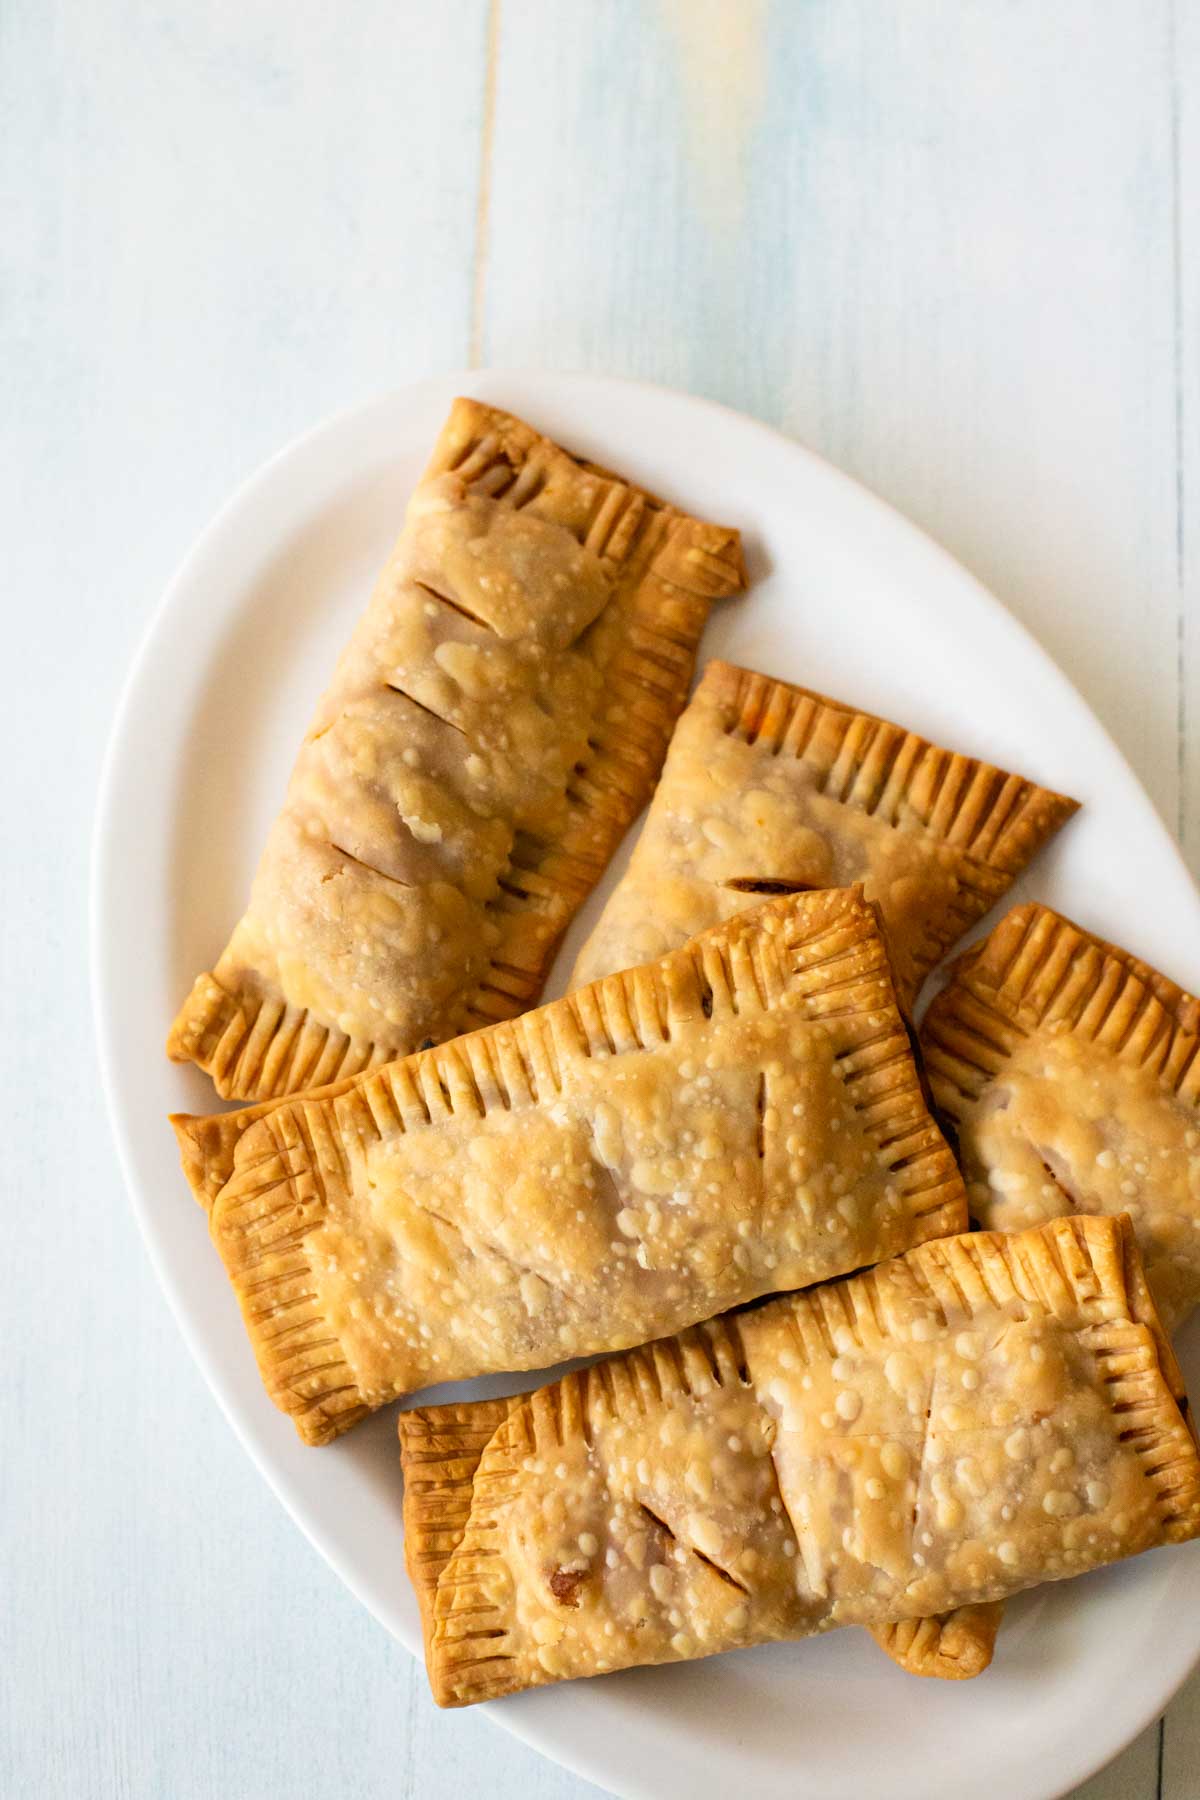 The baked Irish beef hand pies are on a white platter for serving.